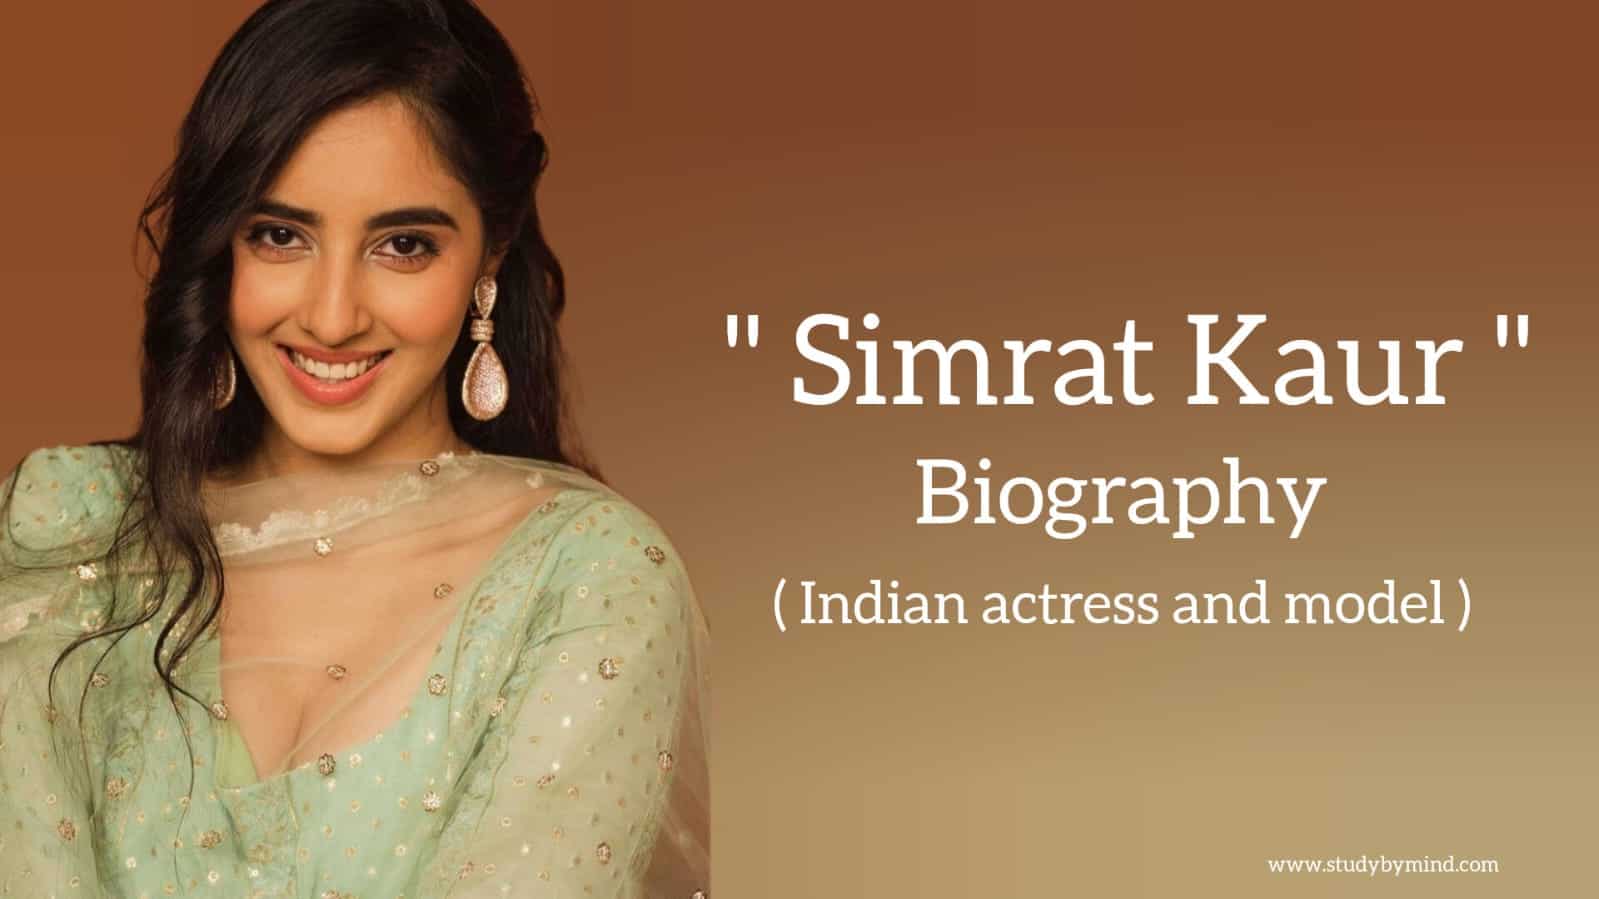 You are currently viewing Simrat kaur biography in english (Indian actress)